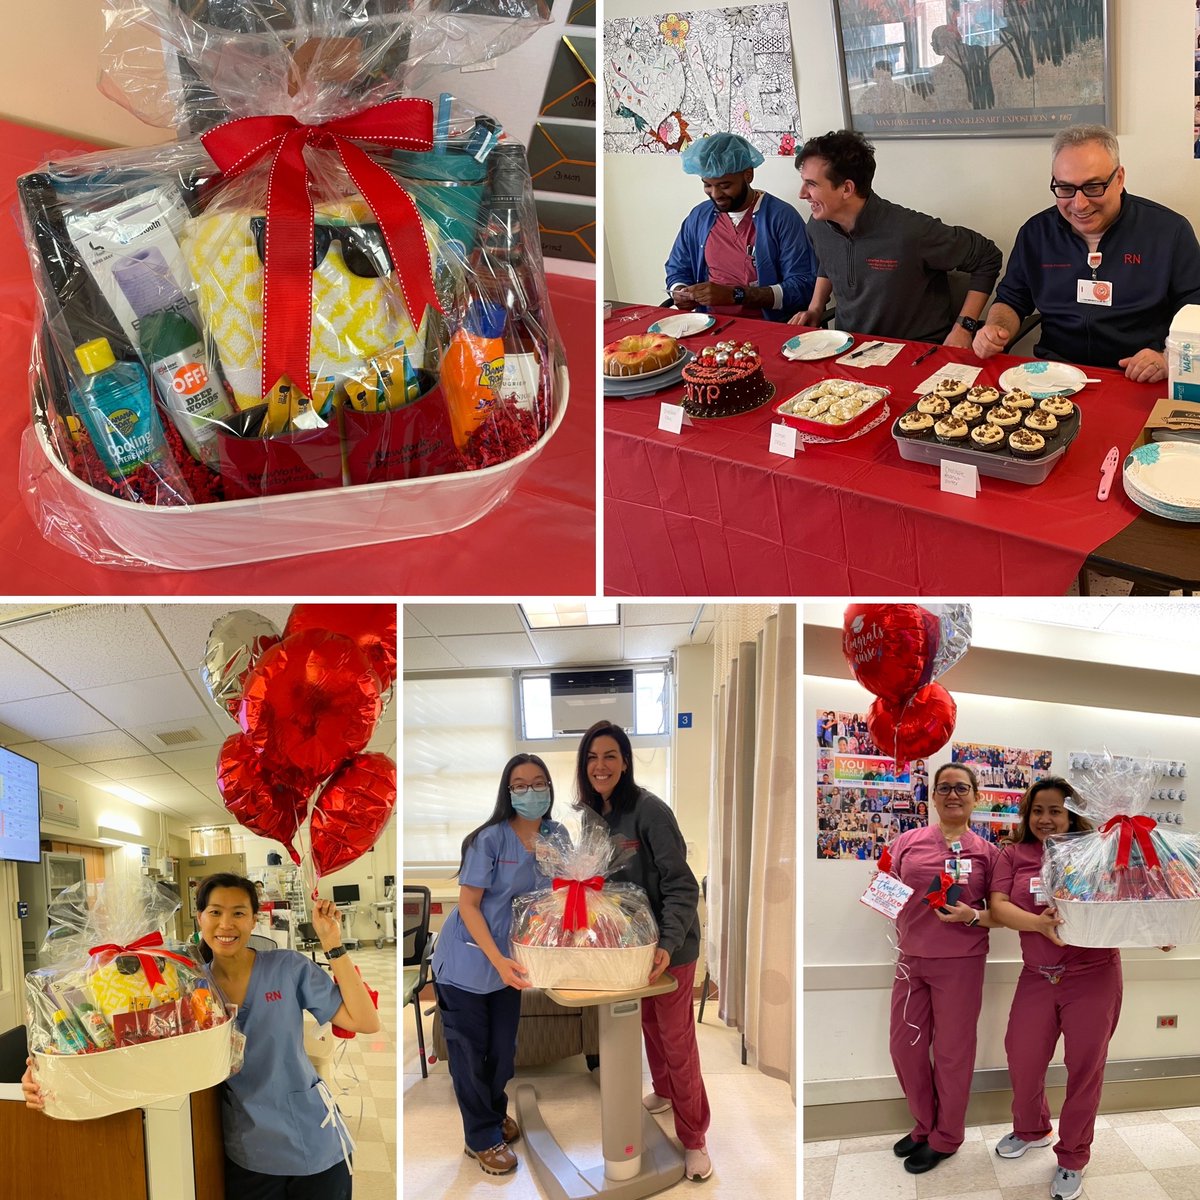 Congratulations to our Periop Nurses Week Raffle winners, Debbie, Carol, Florinda and Lisa, as well as the winner of our Bake-Off, MJ! These winners are ready for some FUN in the SUN! ☀️⛱️